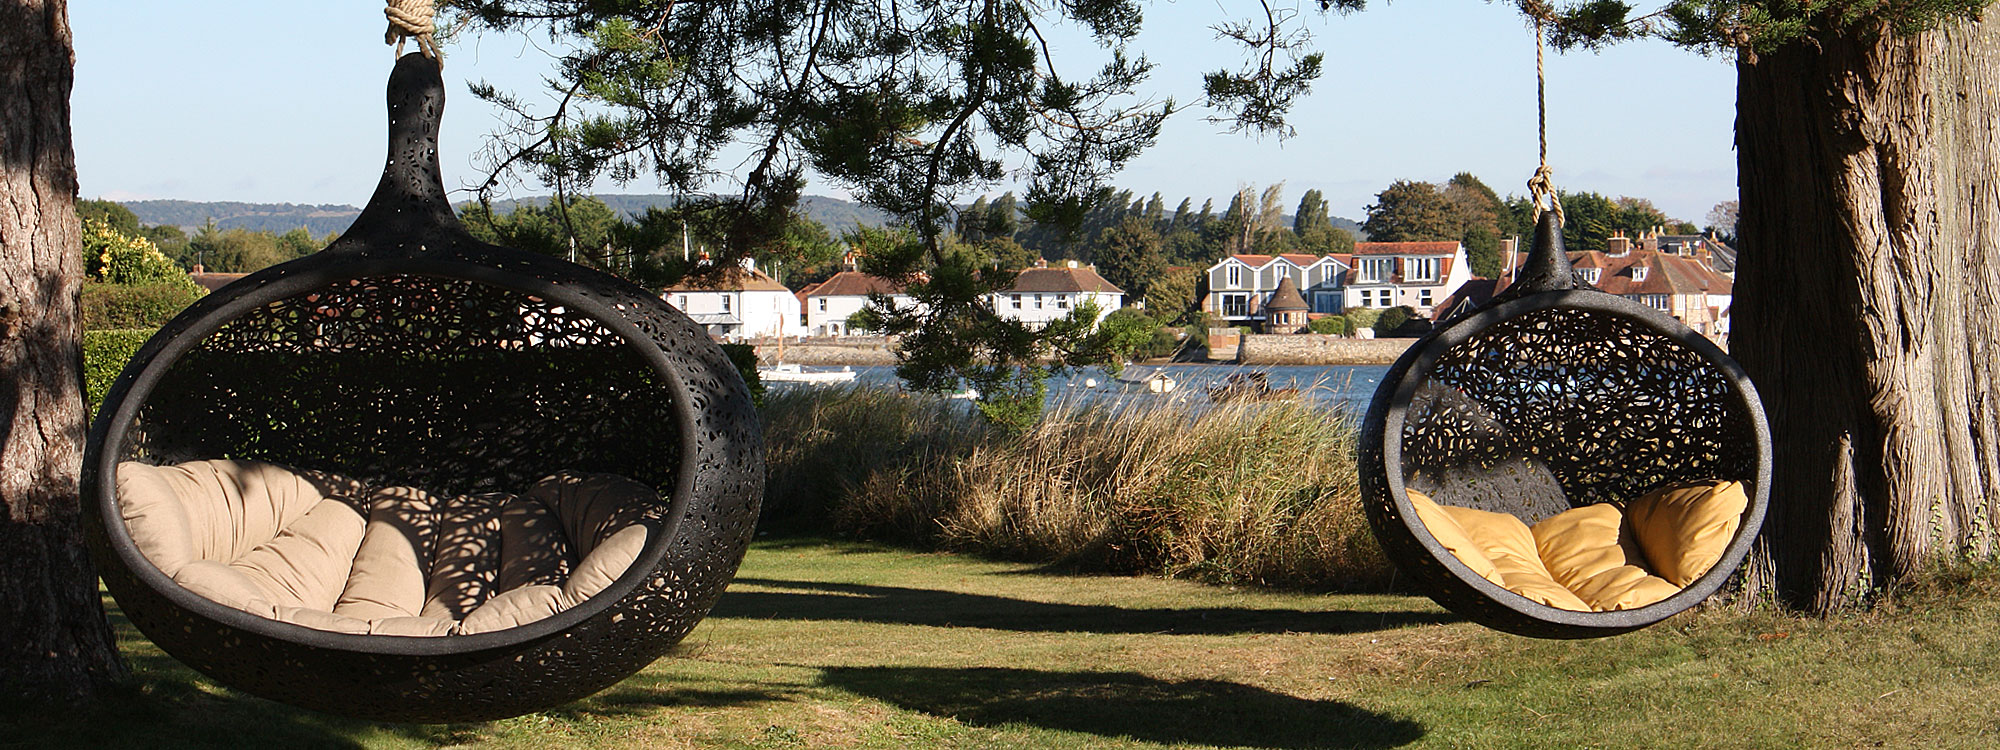 Image of Bios Hide & Bios Mini hung from cedar trees with Bosham harbor in background.